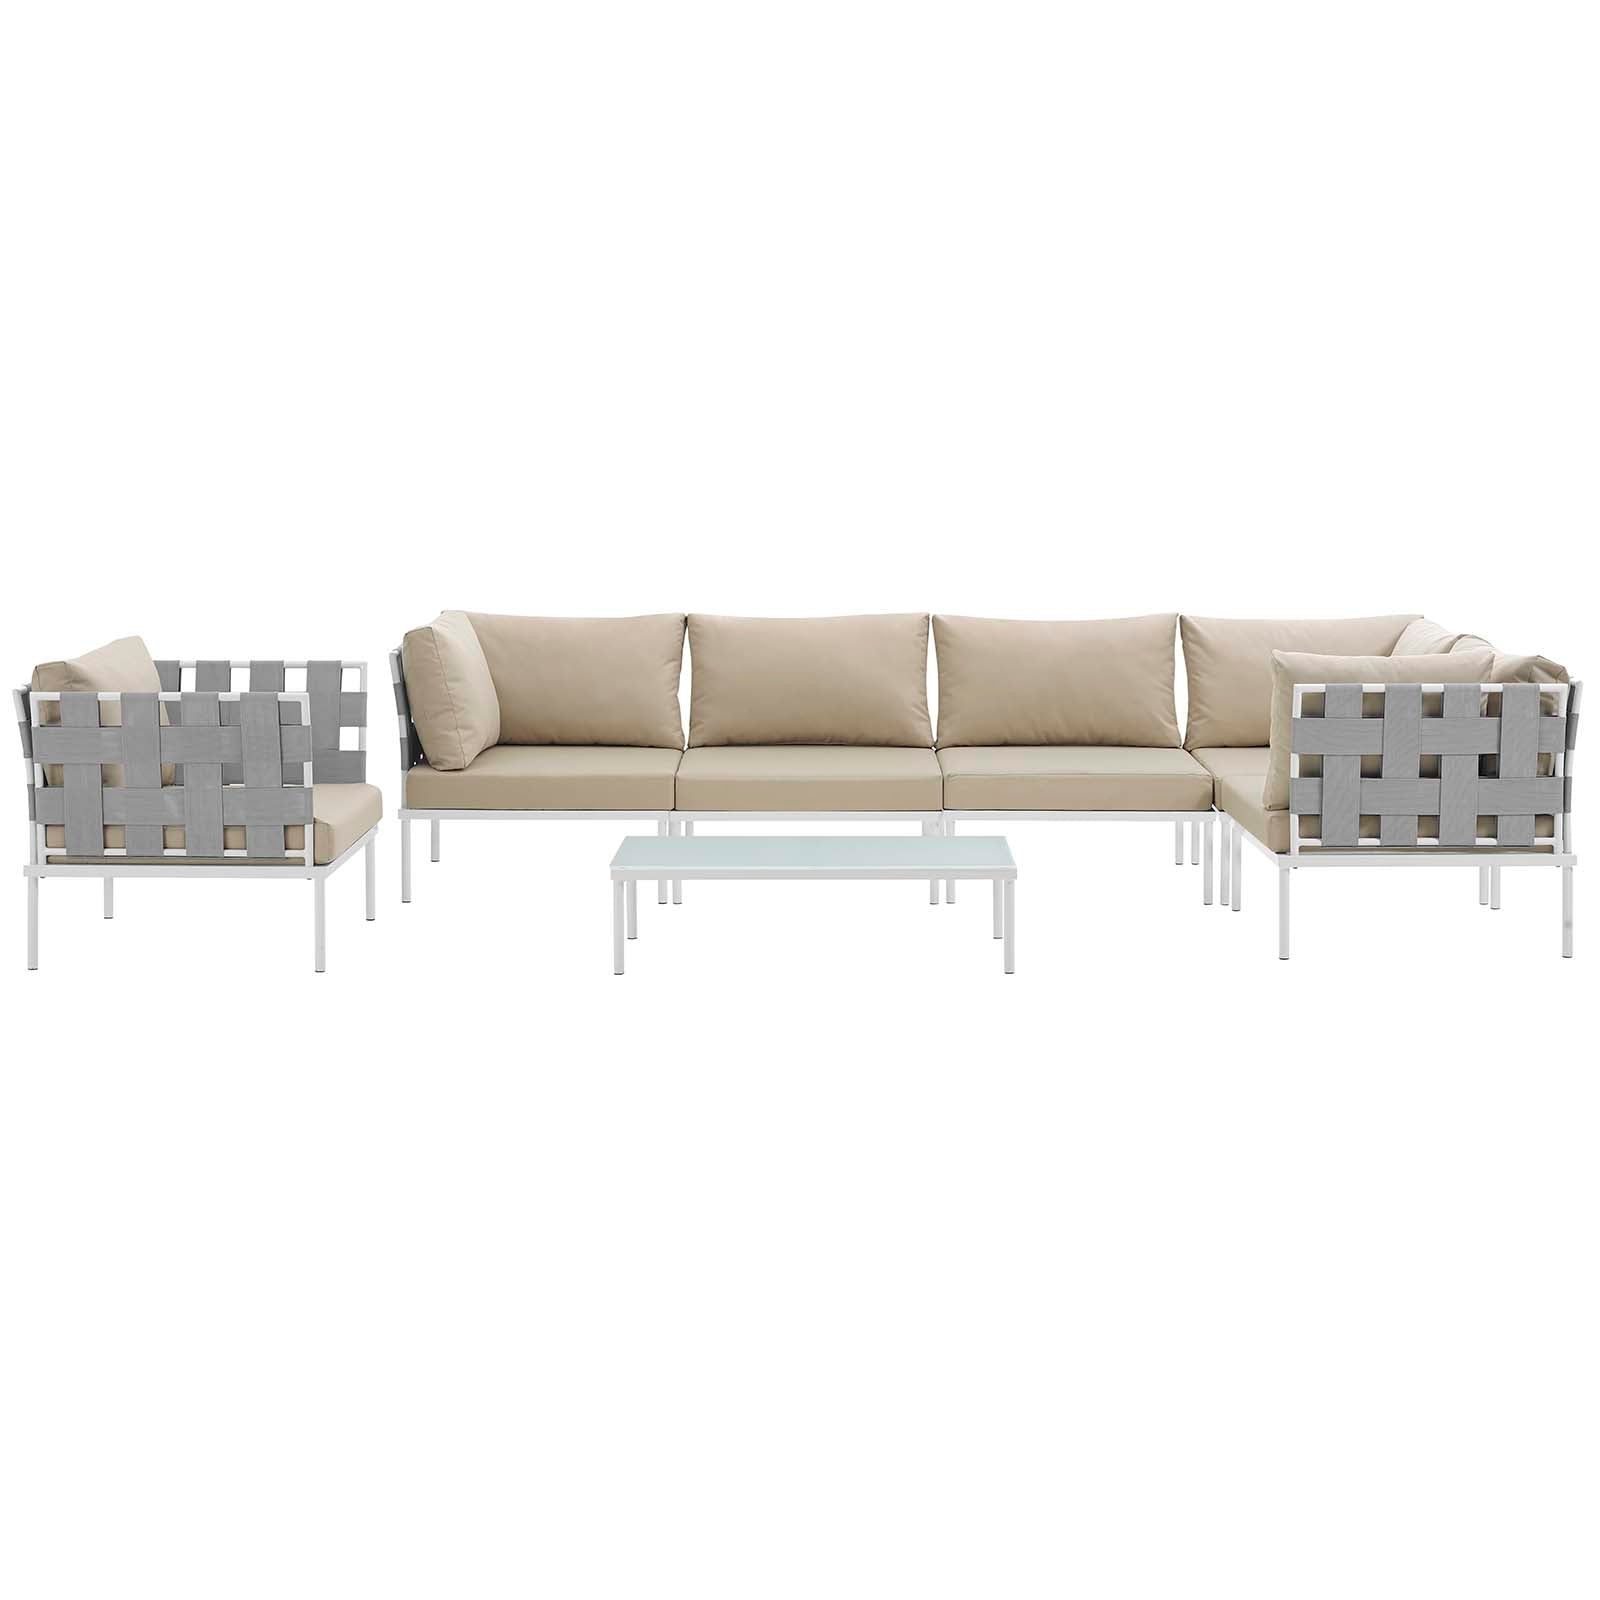 Modway Outdoor Conversation Sets - Harmony 7 Piece Outdoor 165"W Patio Aluminum Sectional Sofa Set Whit